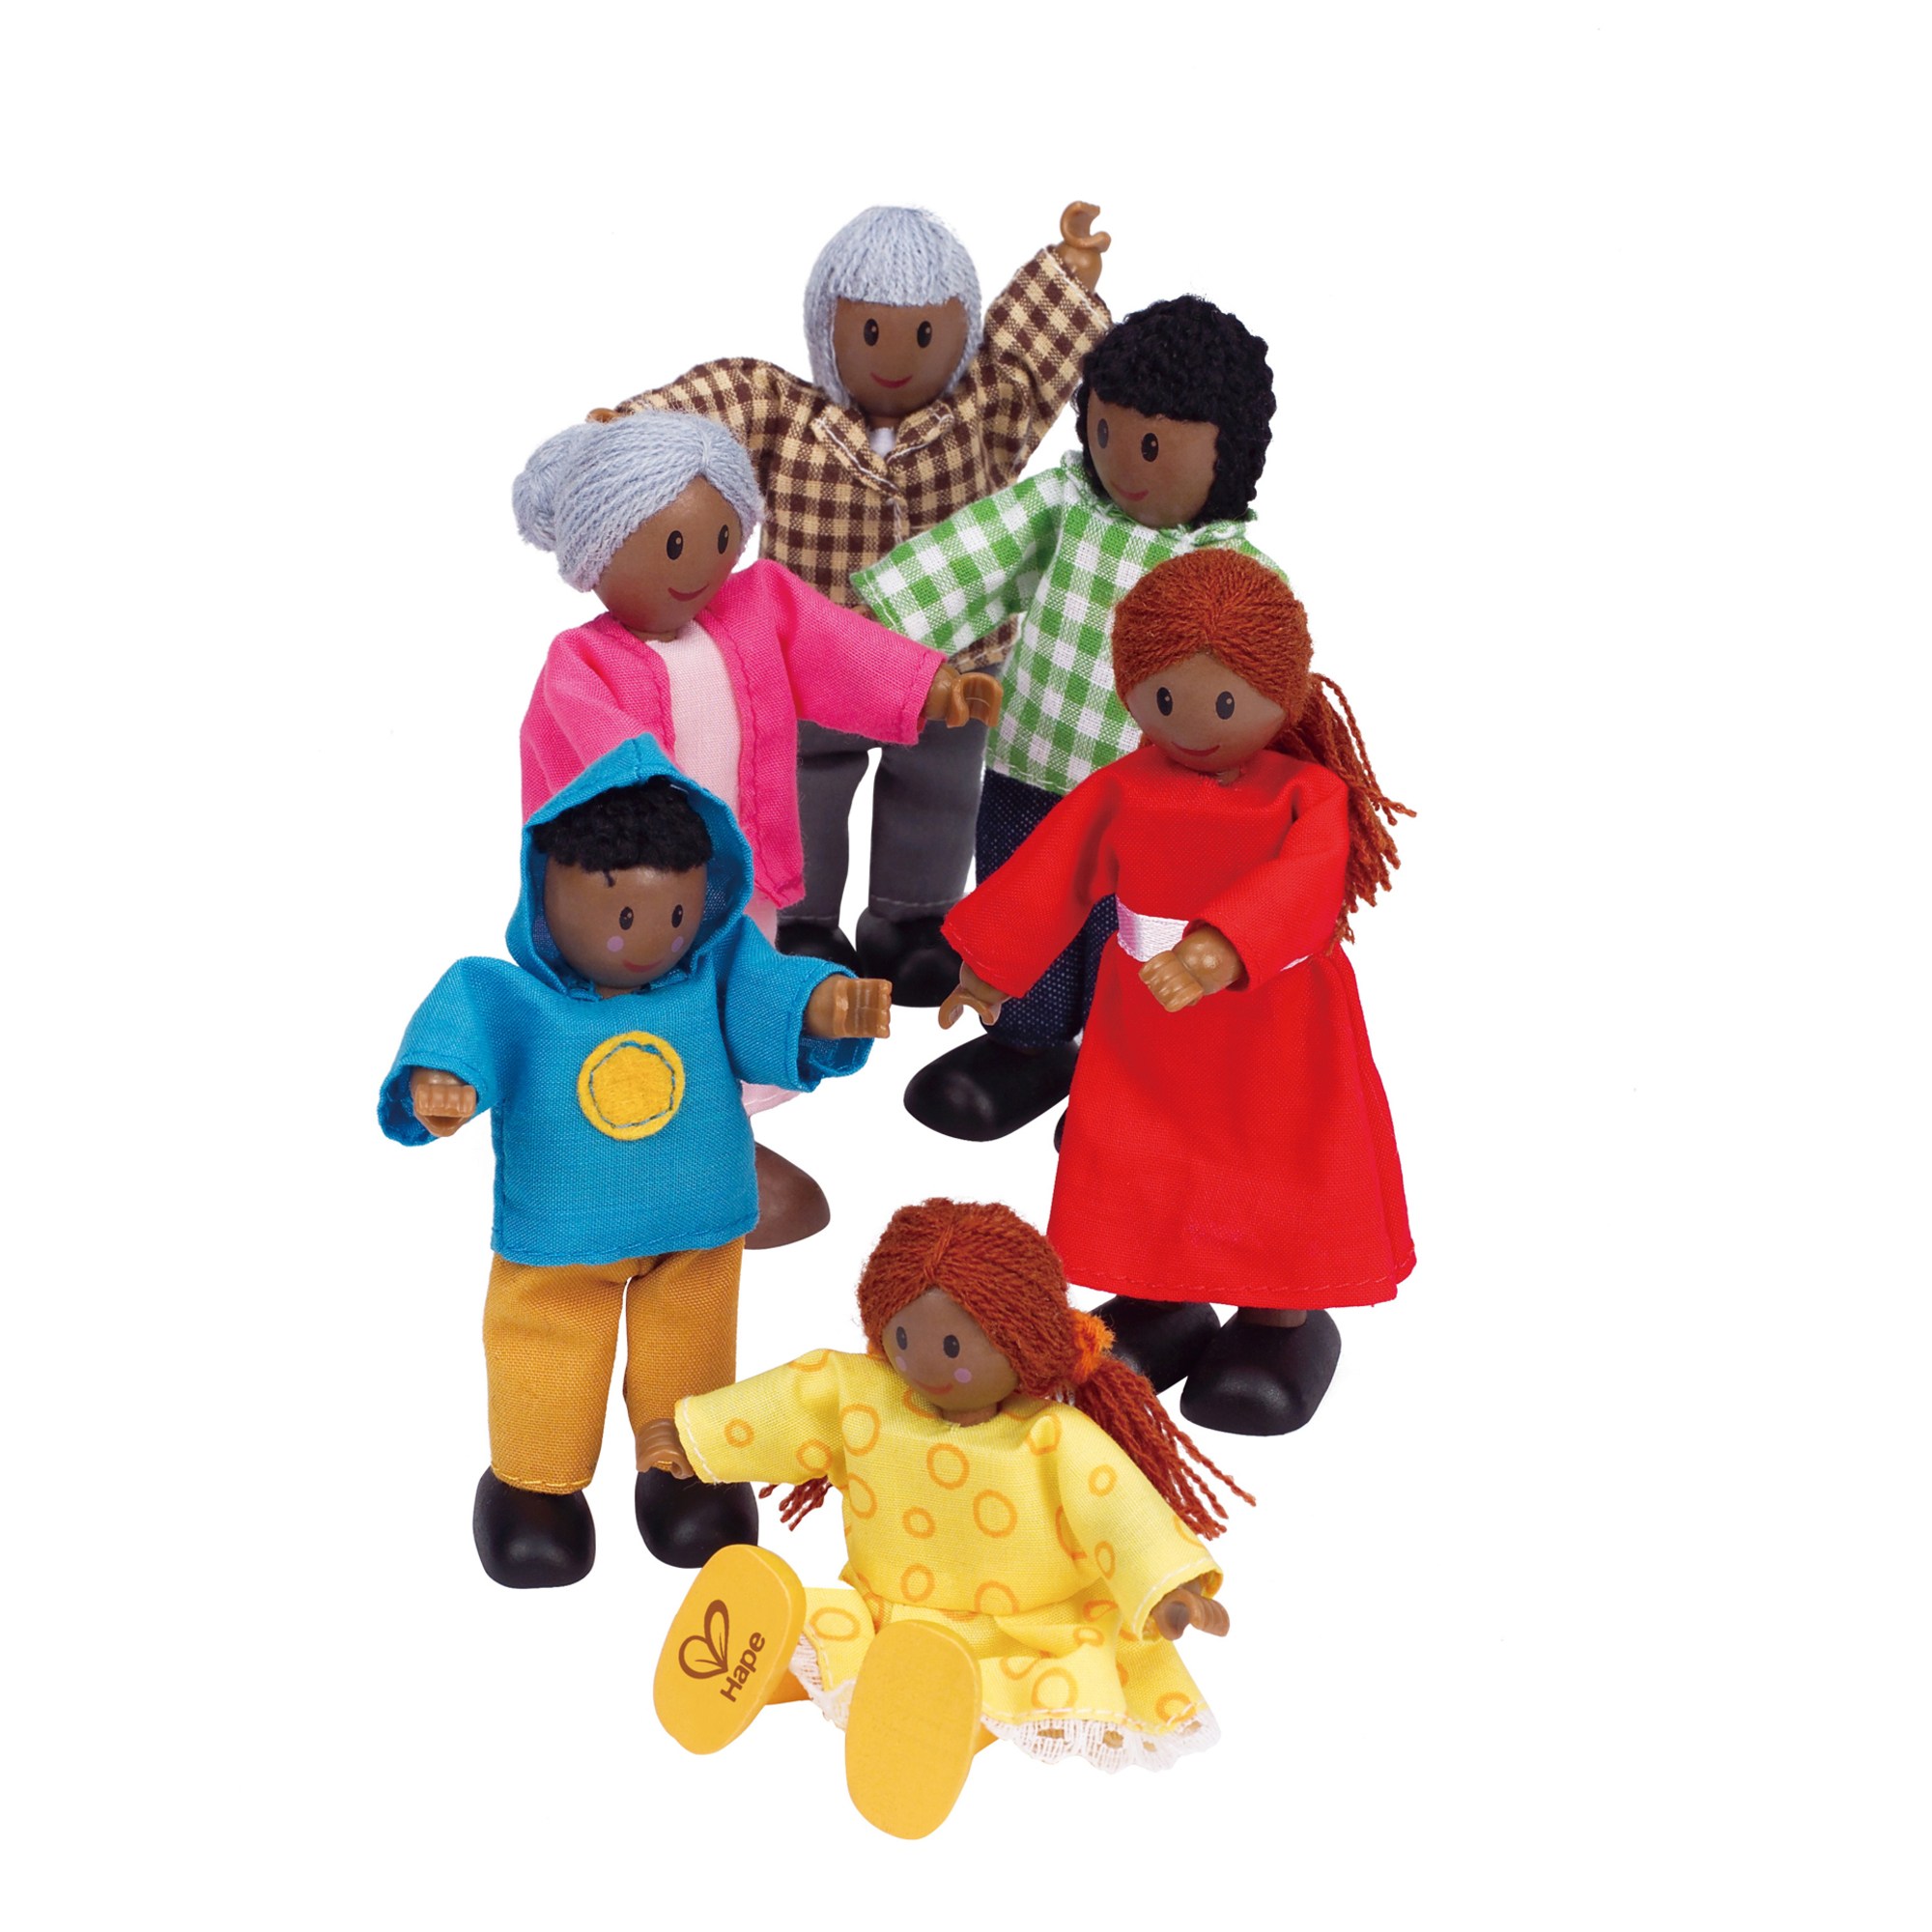 Hape African American Happy Family Dollhouse Set with 6 Dolls - image 4 of 5